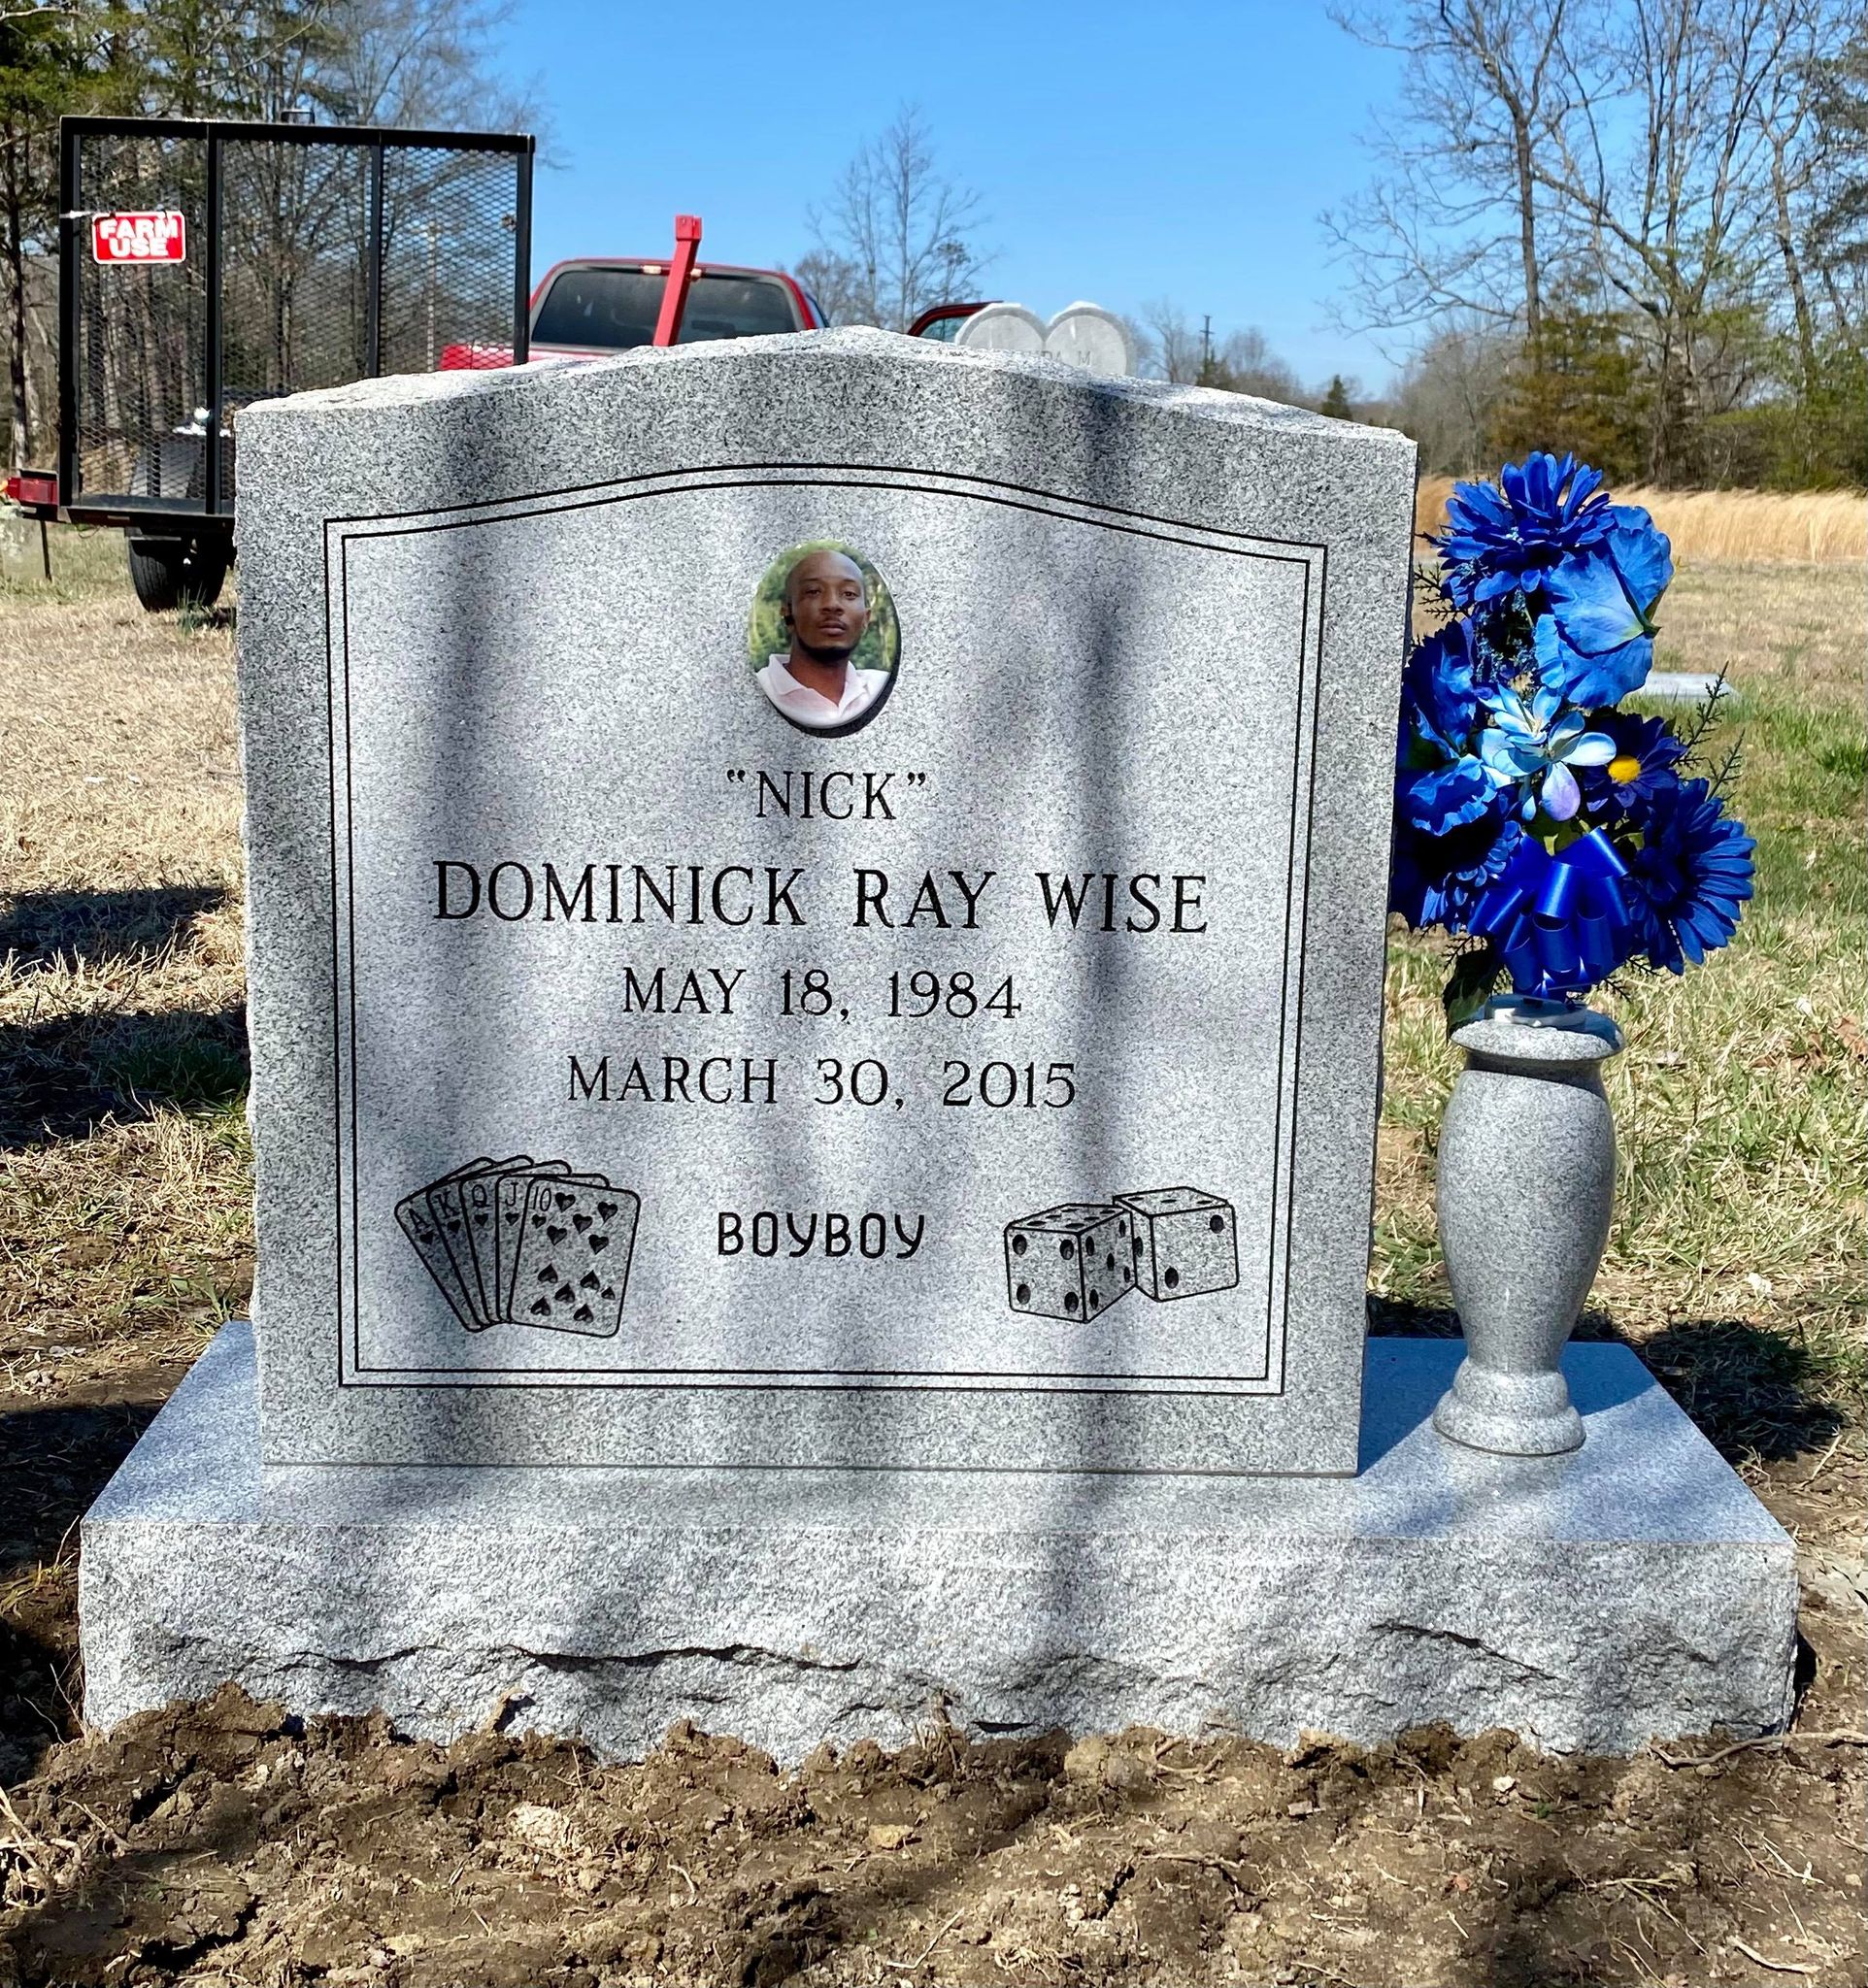 Buying the Right Headstone Flower Holder